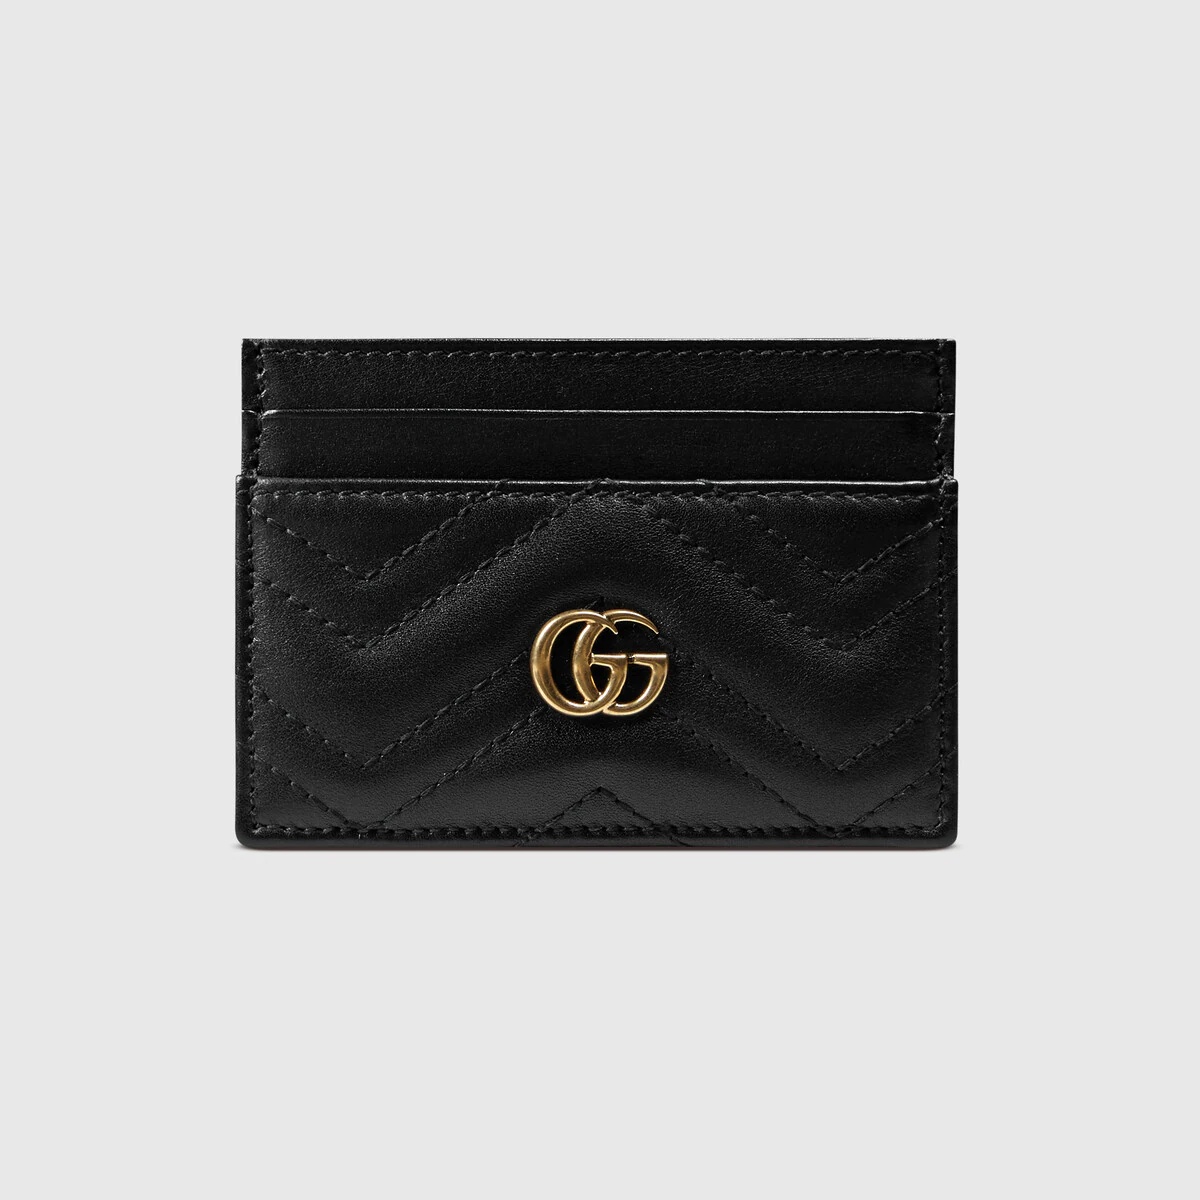 GG Marmont card case - 1